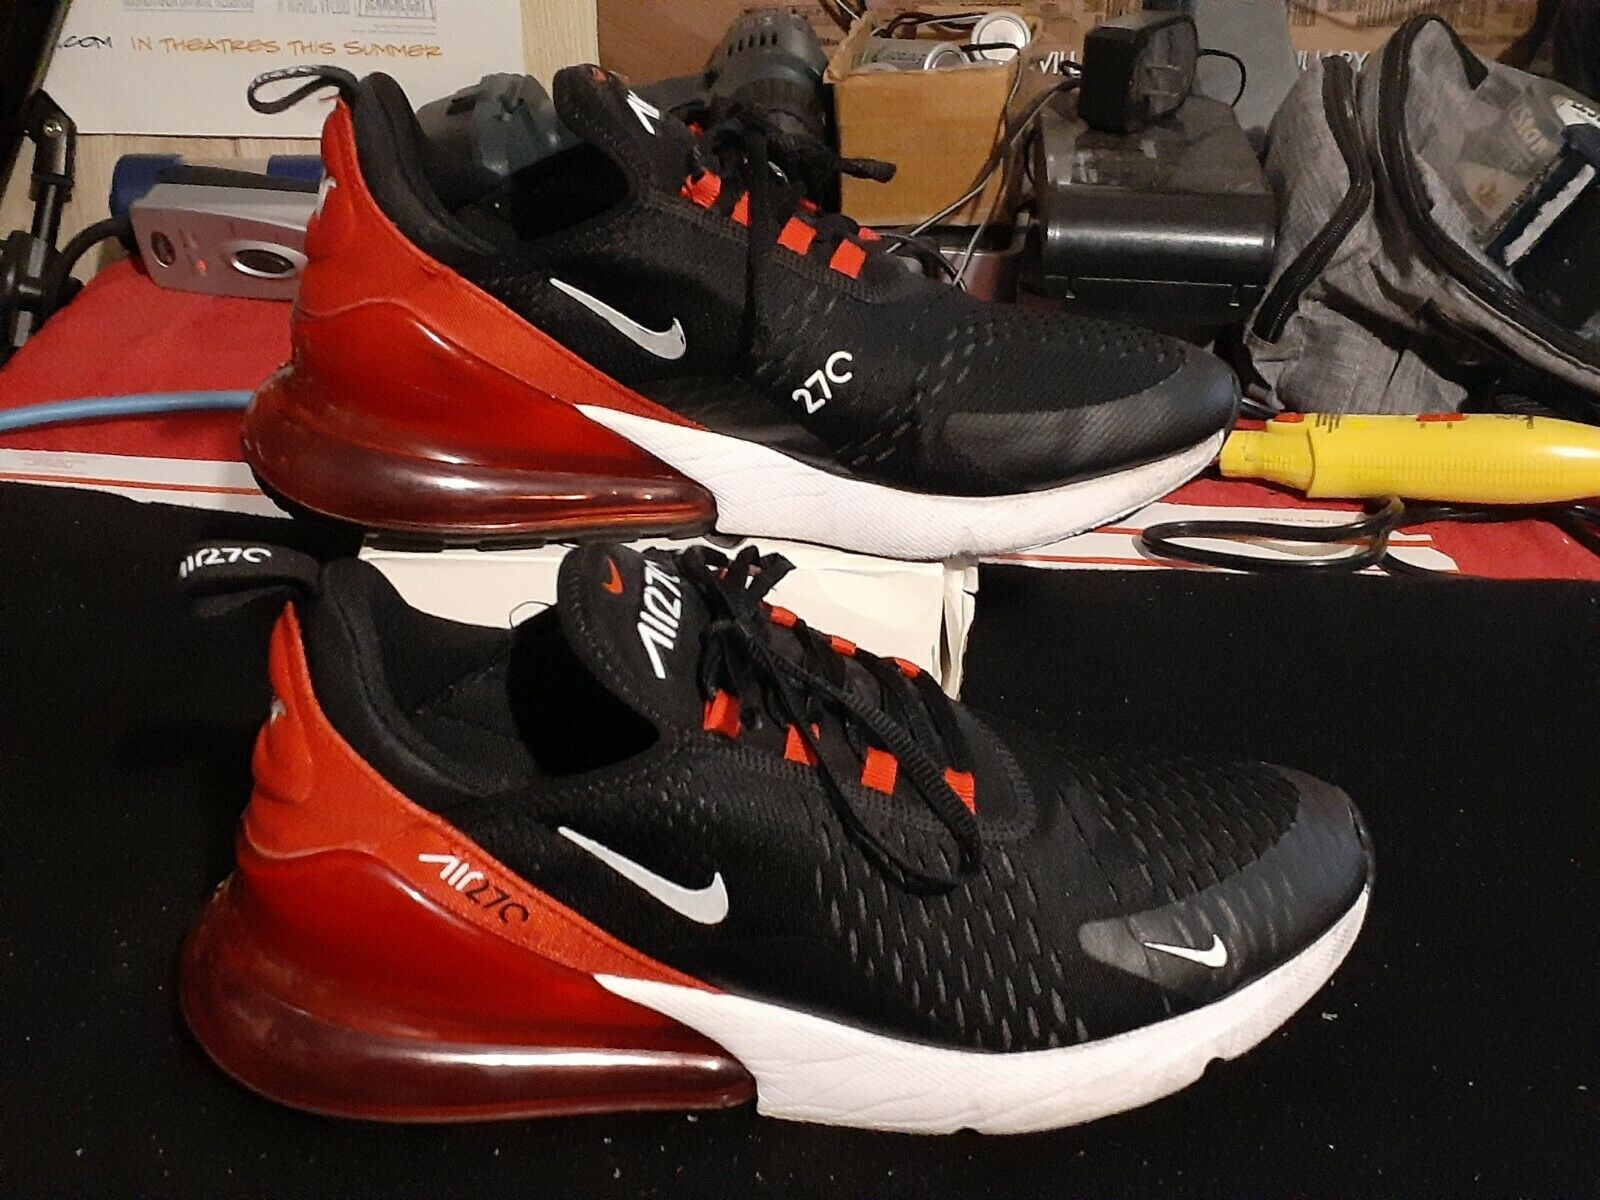 Nike Air Max 270 Bred Red Black Men's running shoes size 9.5 AH8050-022